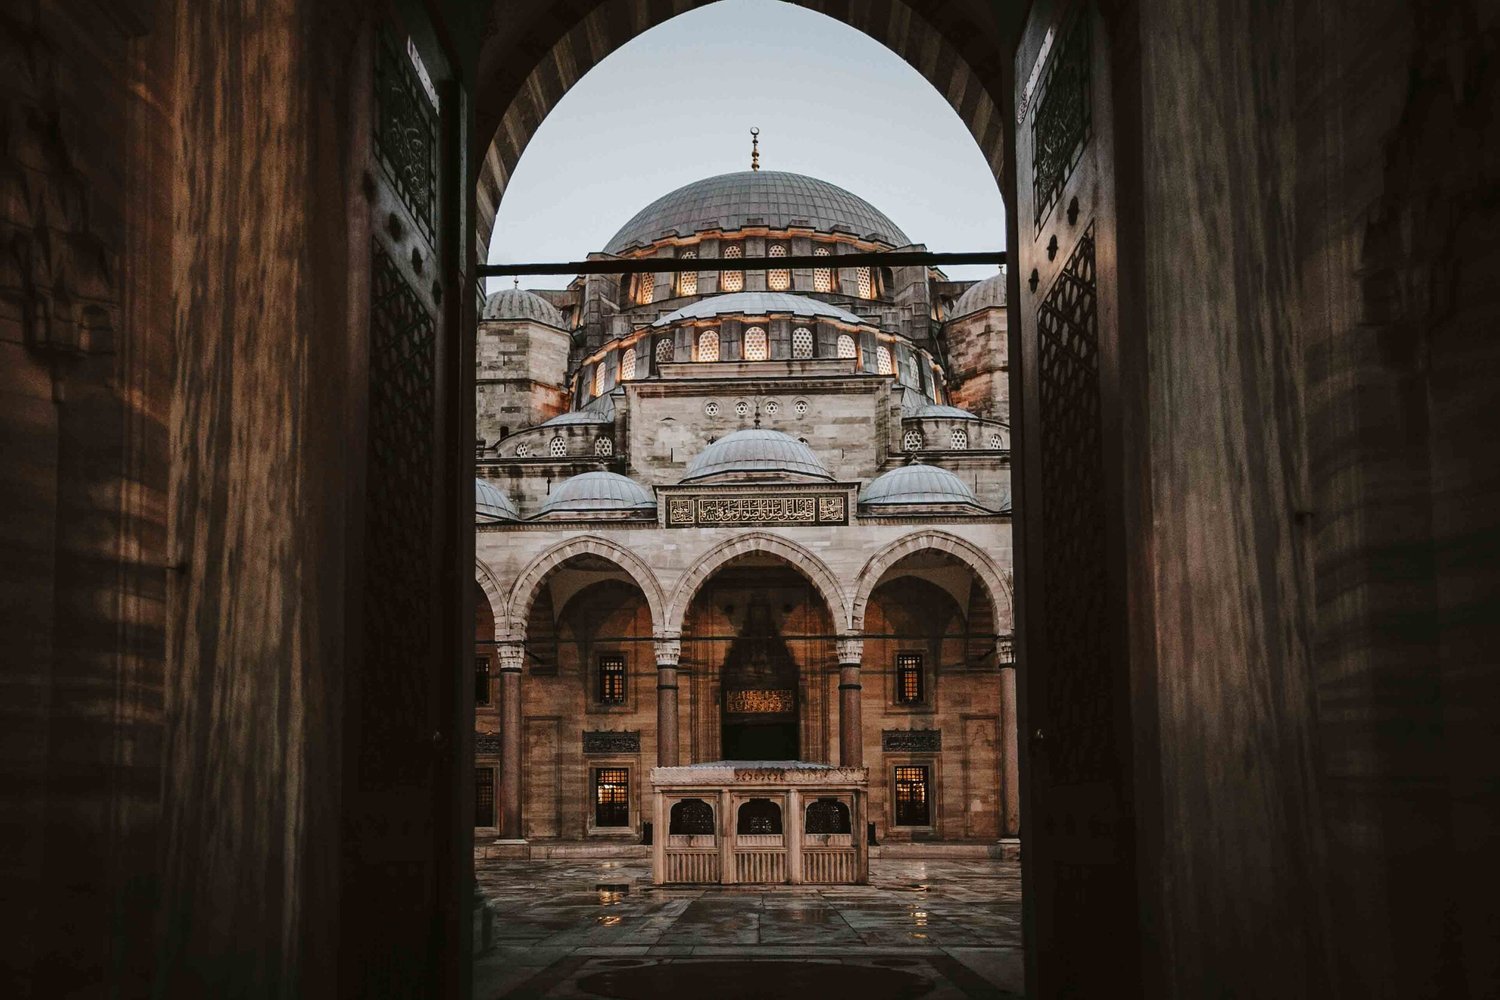 The Hagia Sophia in Turkey where is hot in europe in May